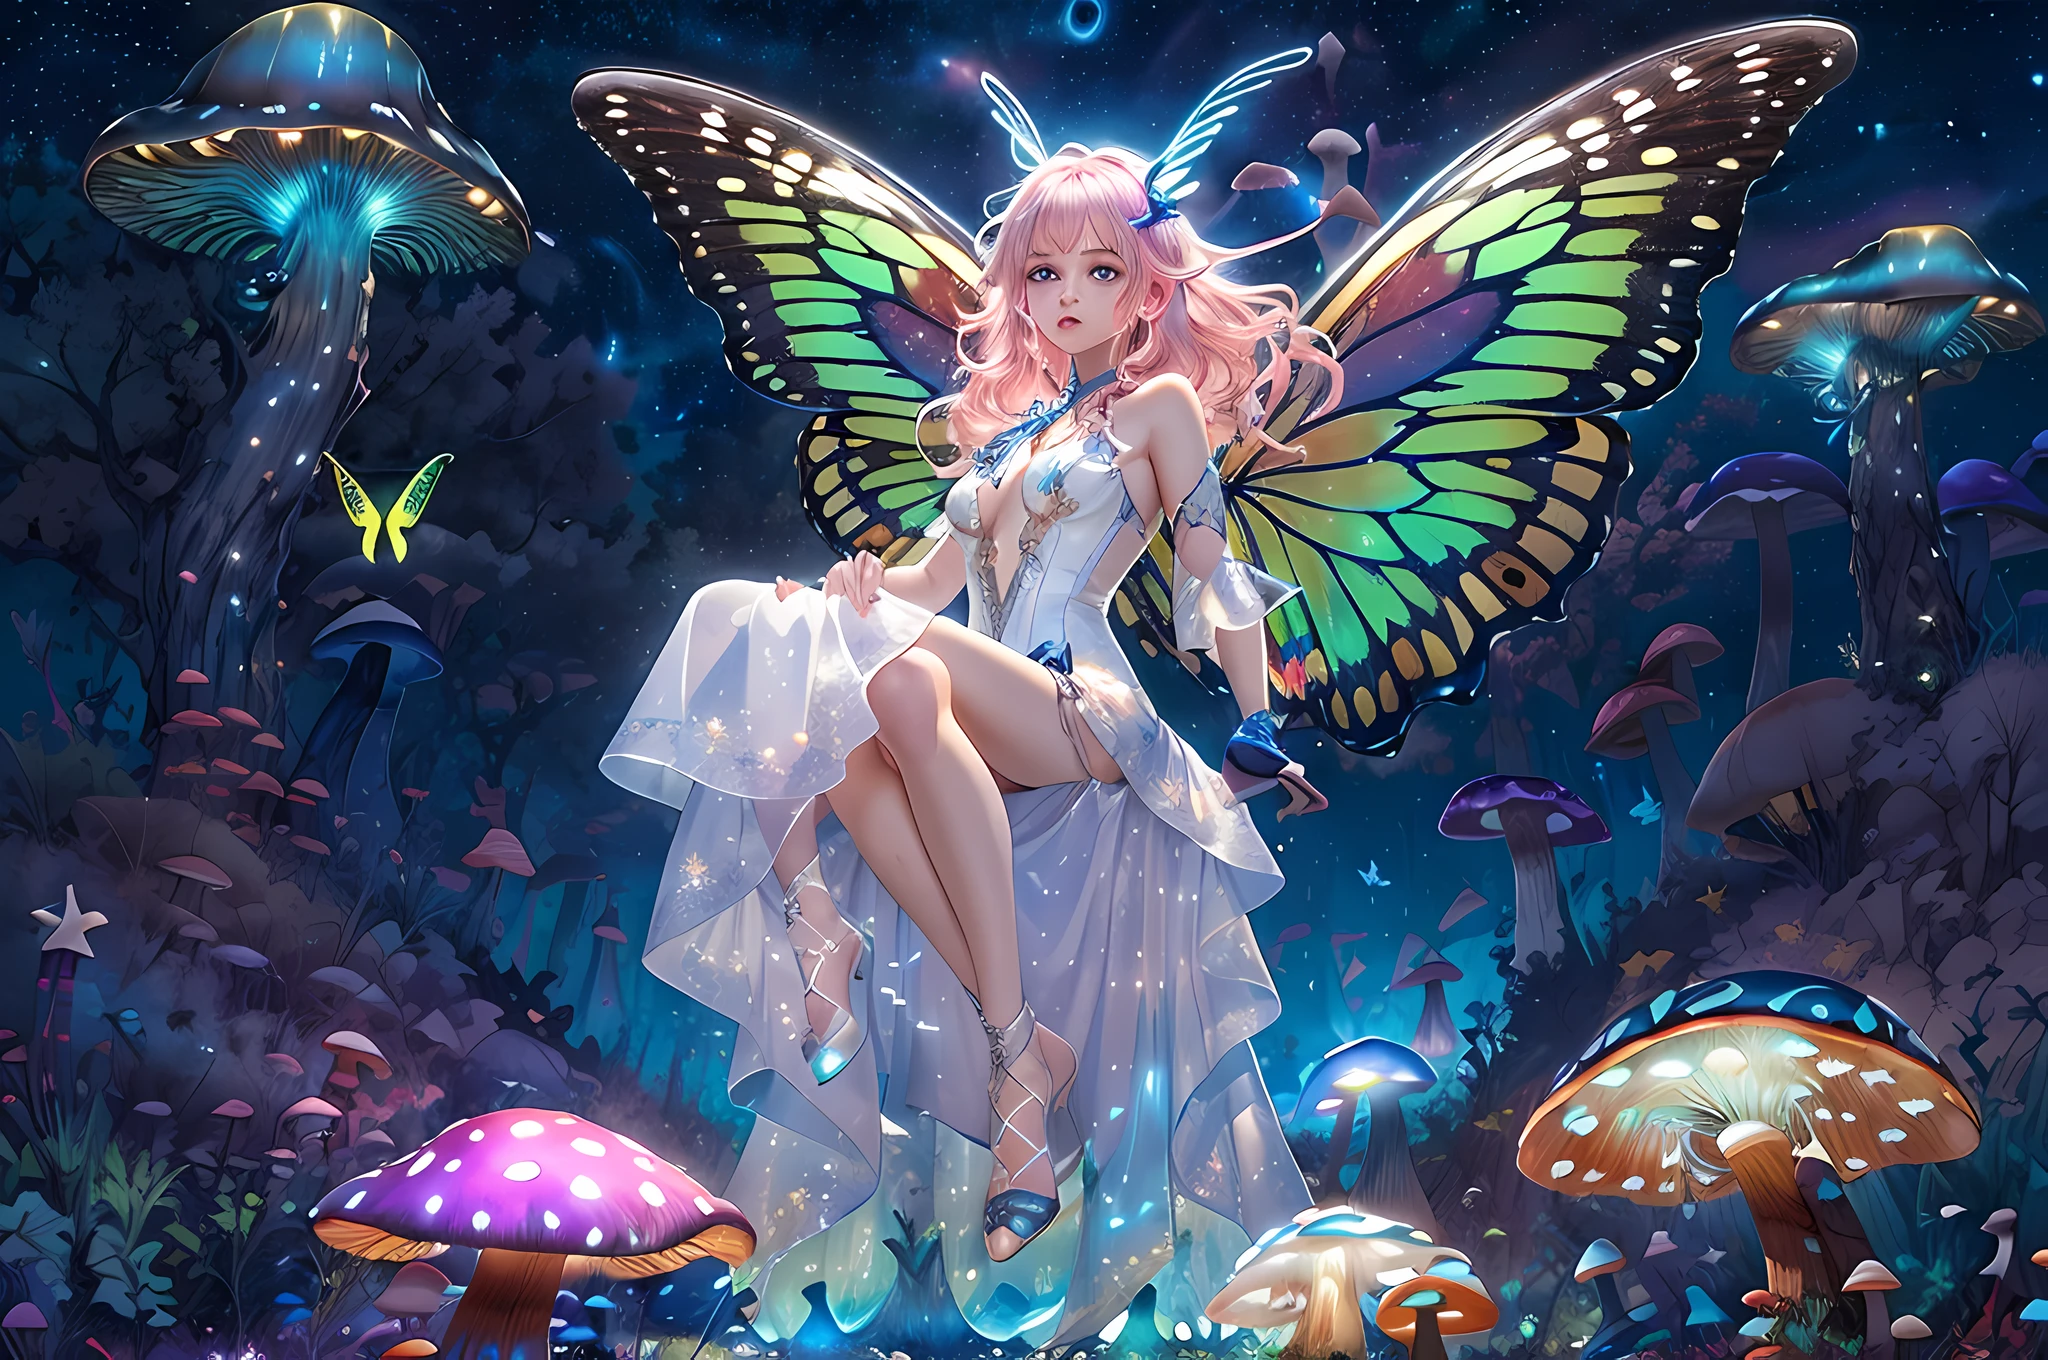 a picture of an exquisite beautiful female fairy sitting on a (Bioluminescent Mushroom: 1.4)  under the starry night sky at the forest, dynamic angle (ultra detailed, Masterpiece, best quality), ultra detailed face (ultra detailed, Masterpiece, best quality), ultra feminine, fare skin, pink hair, wavy hair, dynamic eyes color, glowing eyes, intense eyes, red lips, wearing white dress, elegant silk dress (ultra detailed, Masterpiece, best quality), butterfly wings (ultra detailed, Masterpiece, best quality), wearing high heeled boots, phosphorous glowing  Bioluminescent Mushroom, sky full of stars background, moon, beat details, best quality, 8k, [ultra detailed], masterpiece, best quality, (ultra detailed), full body, ultra wide shot, photorealism, fantasy art, gl0w1ngR,